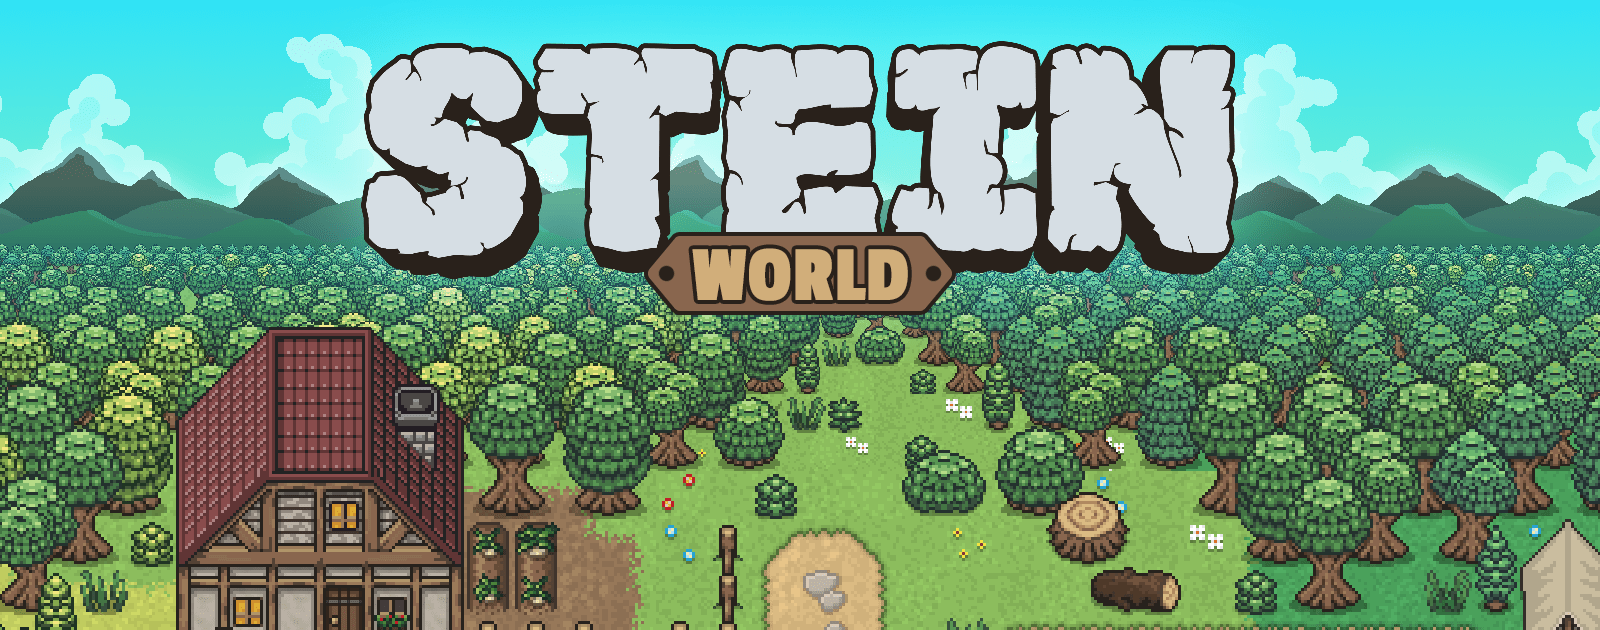 Free To Play Mmorpg Stein World Online Browser Rpg